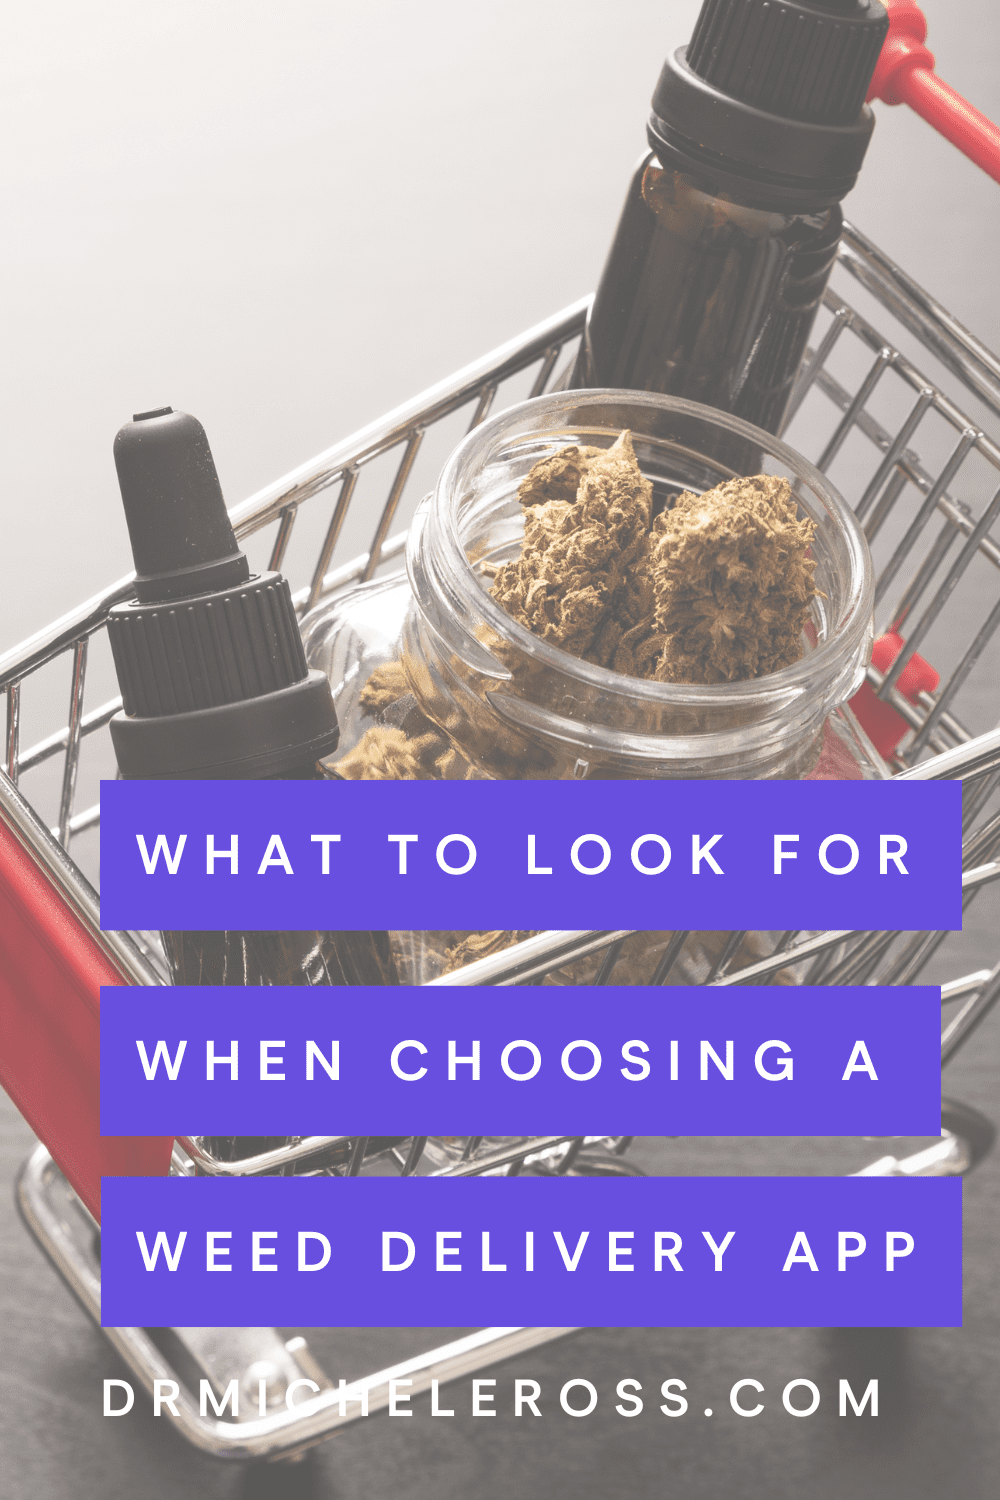 cannabis flower in weed delivery shopping cart